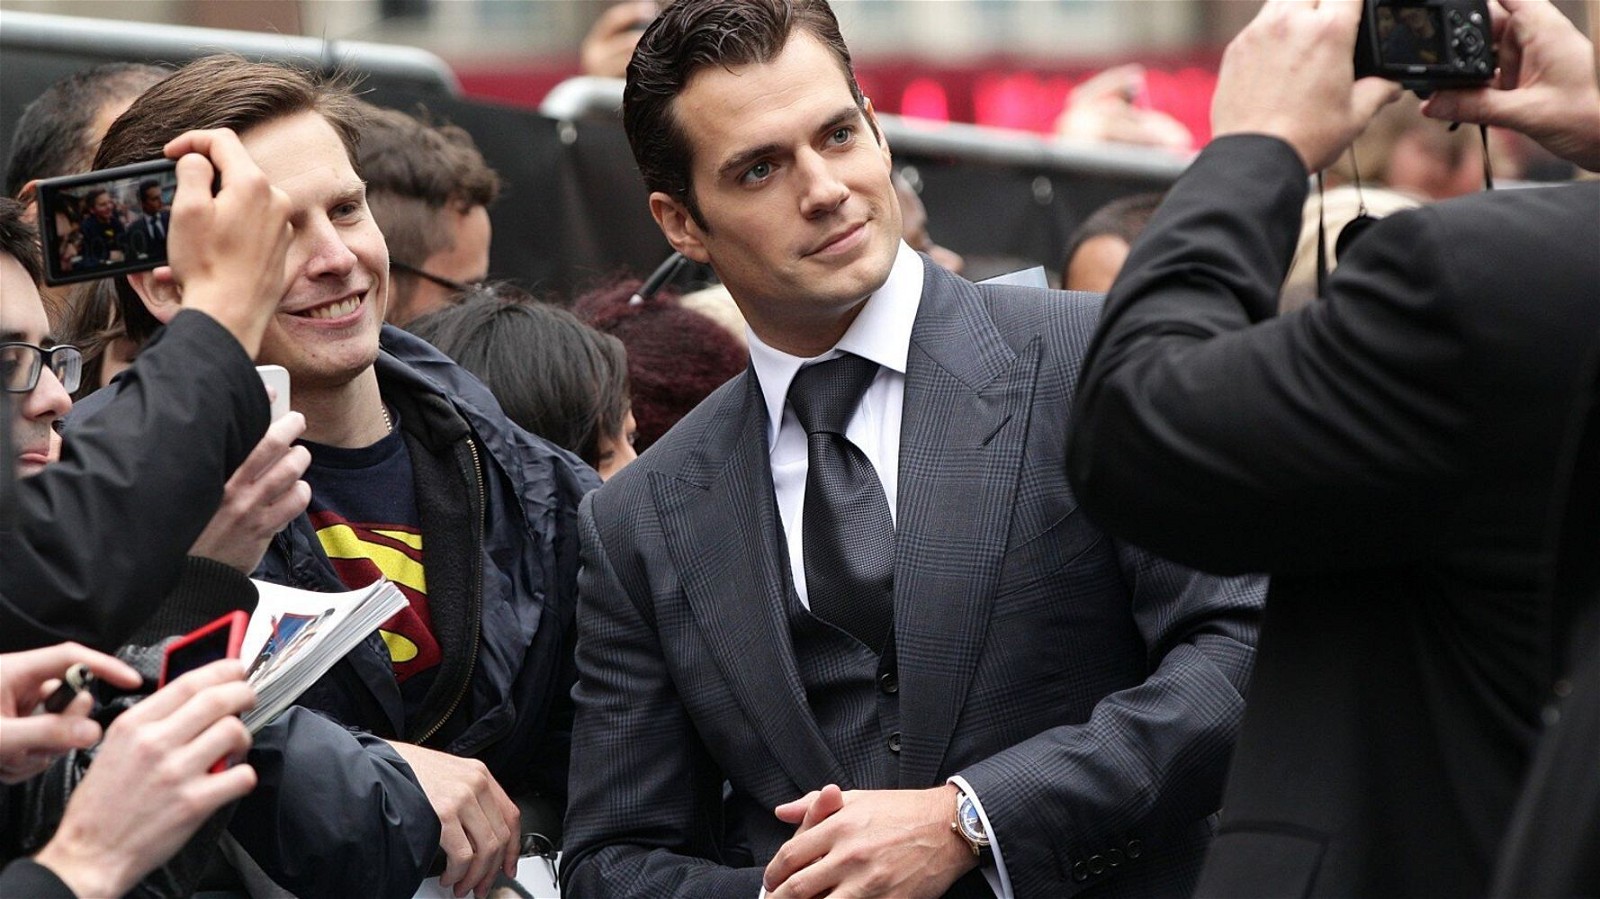 Henry Cavill at the MoS European premiere